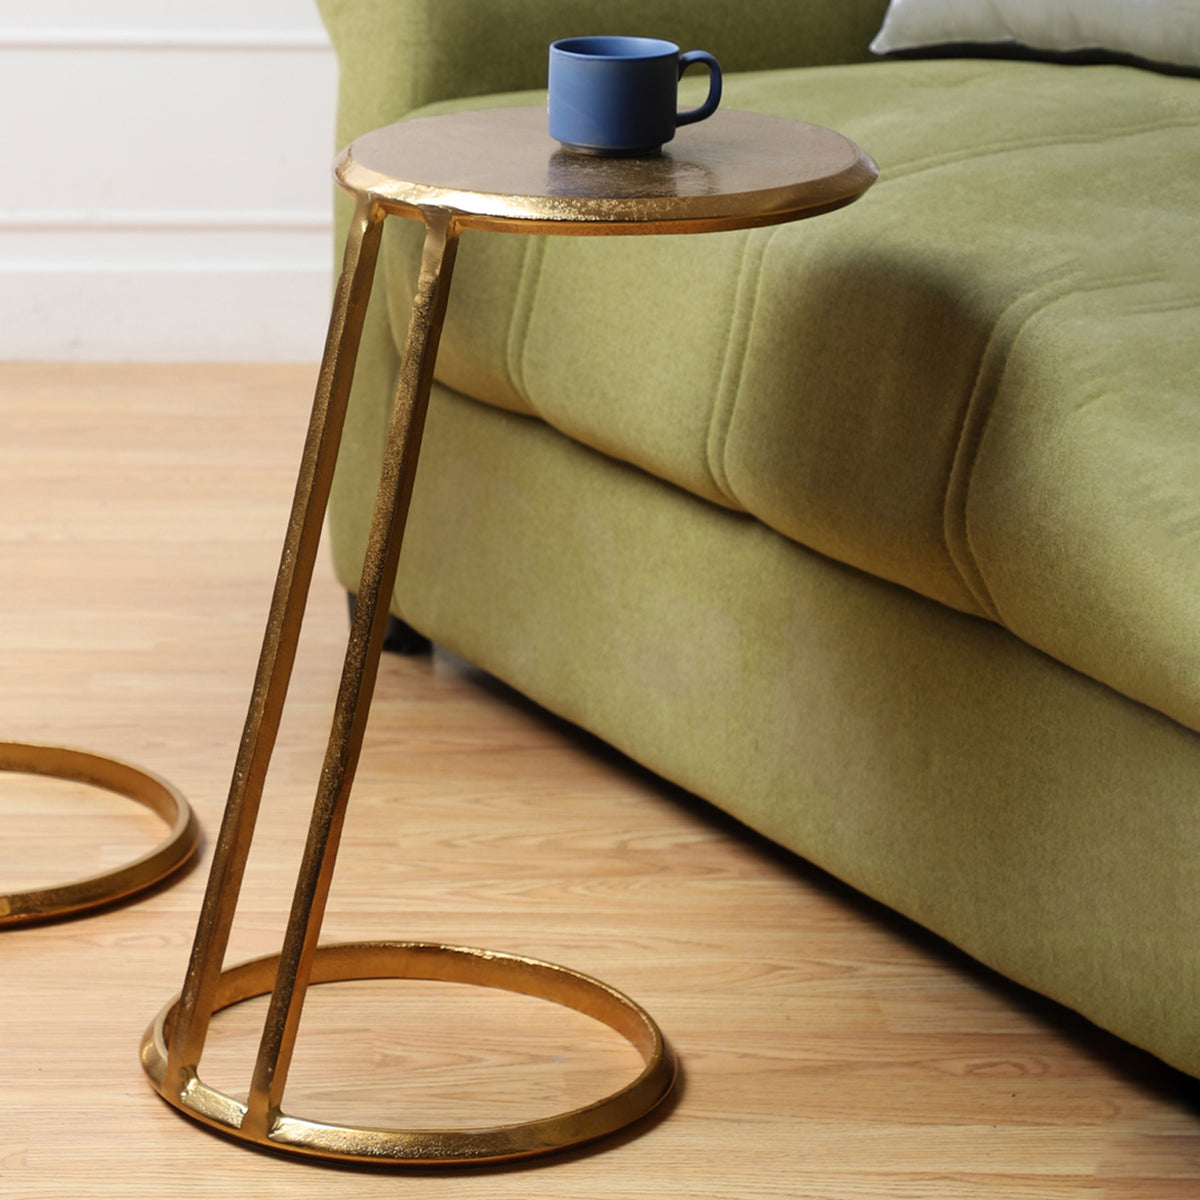 Slanted Nesting Tables by in Raw Gold PC Finish small size